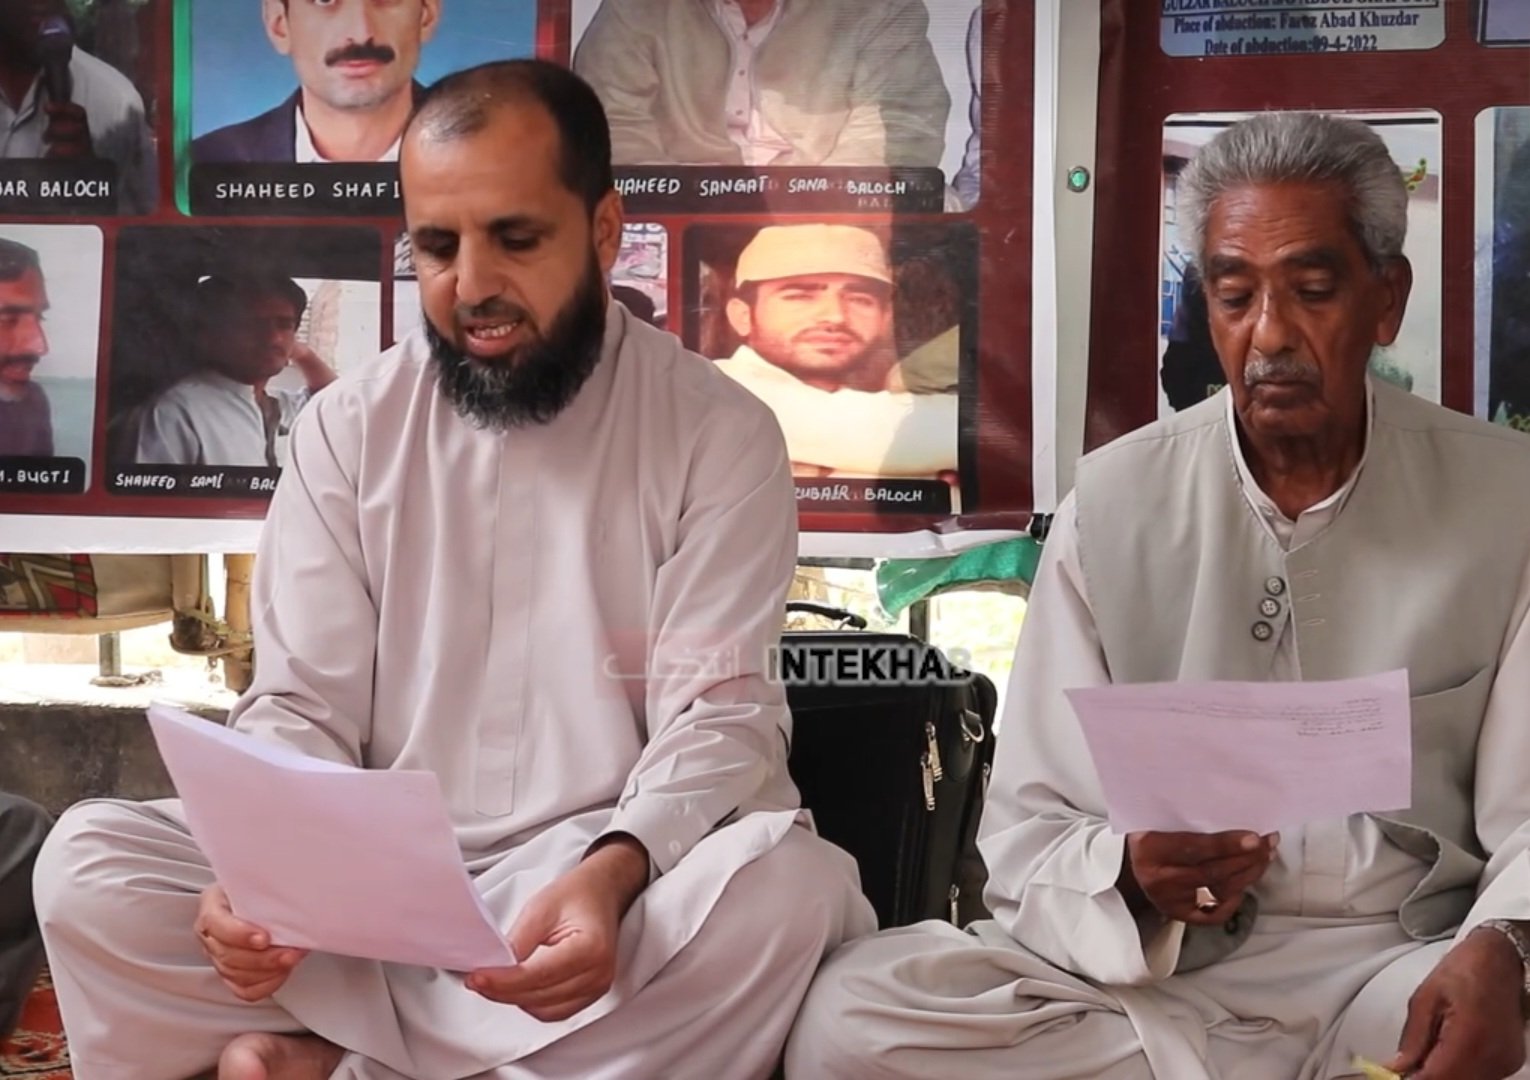 Chief Justice of Pakistan should ensure the recovery of enforced disappeared persons - VBMP